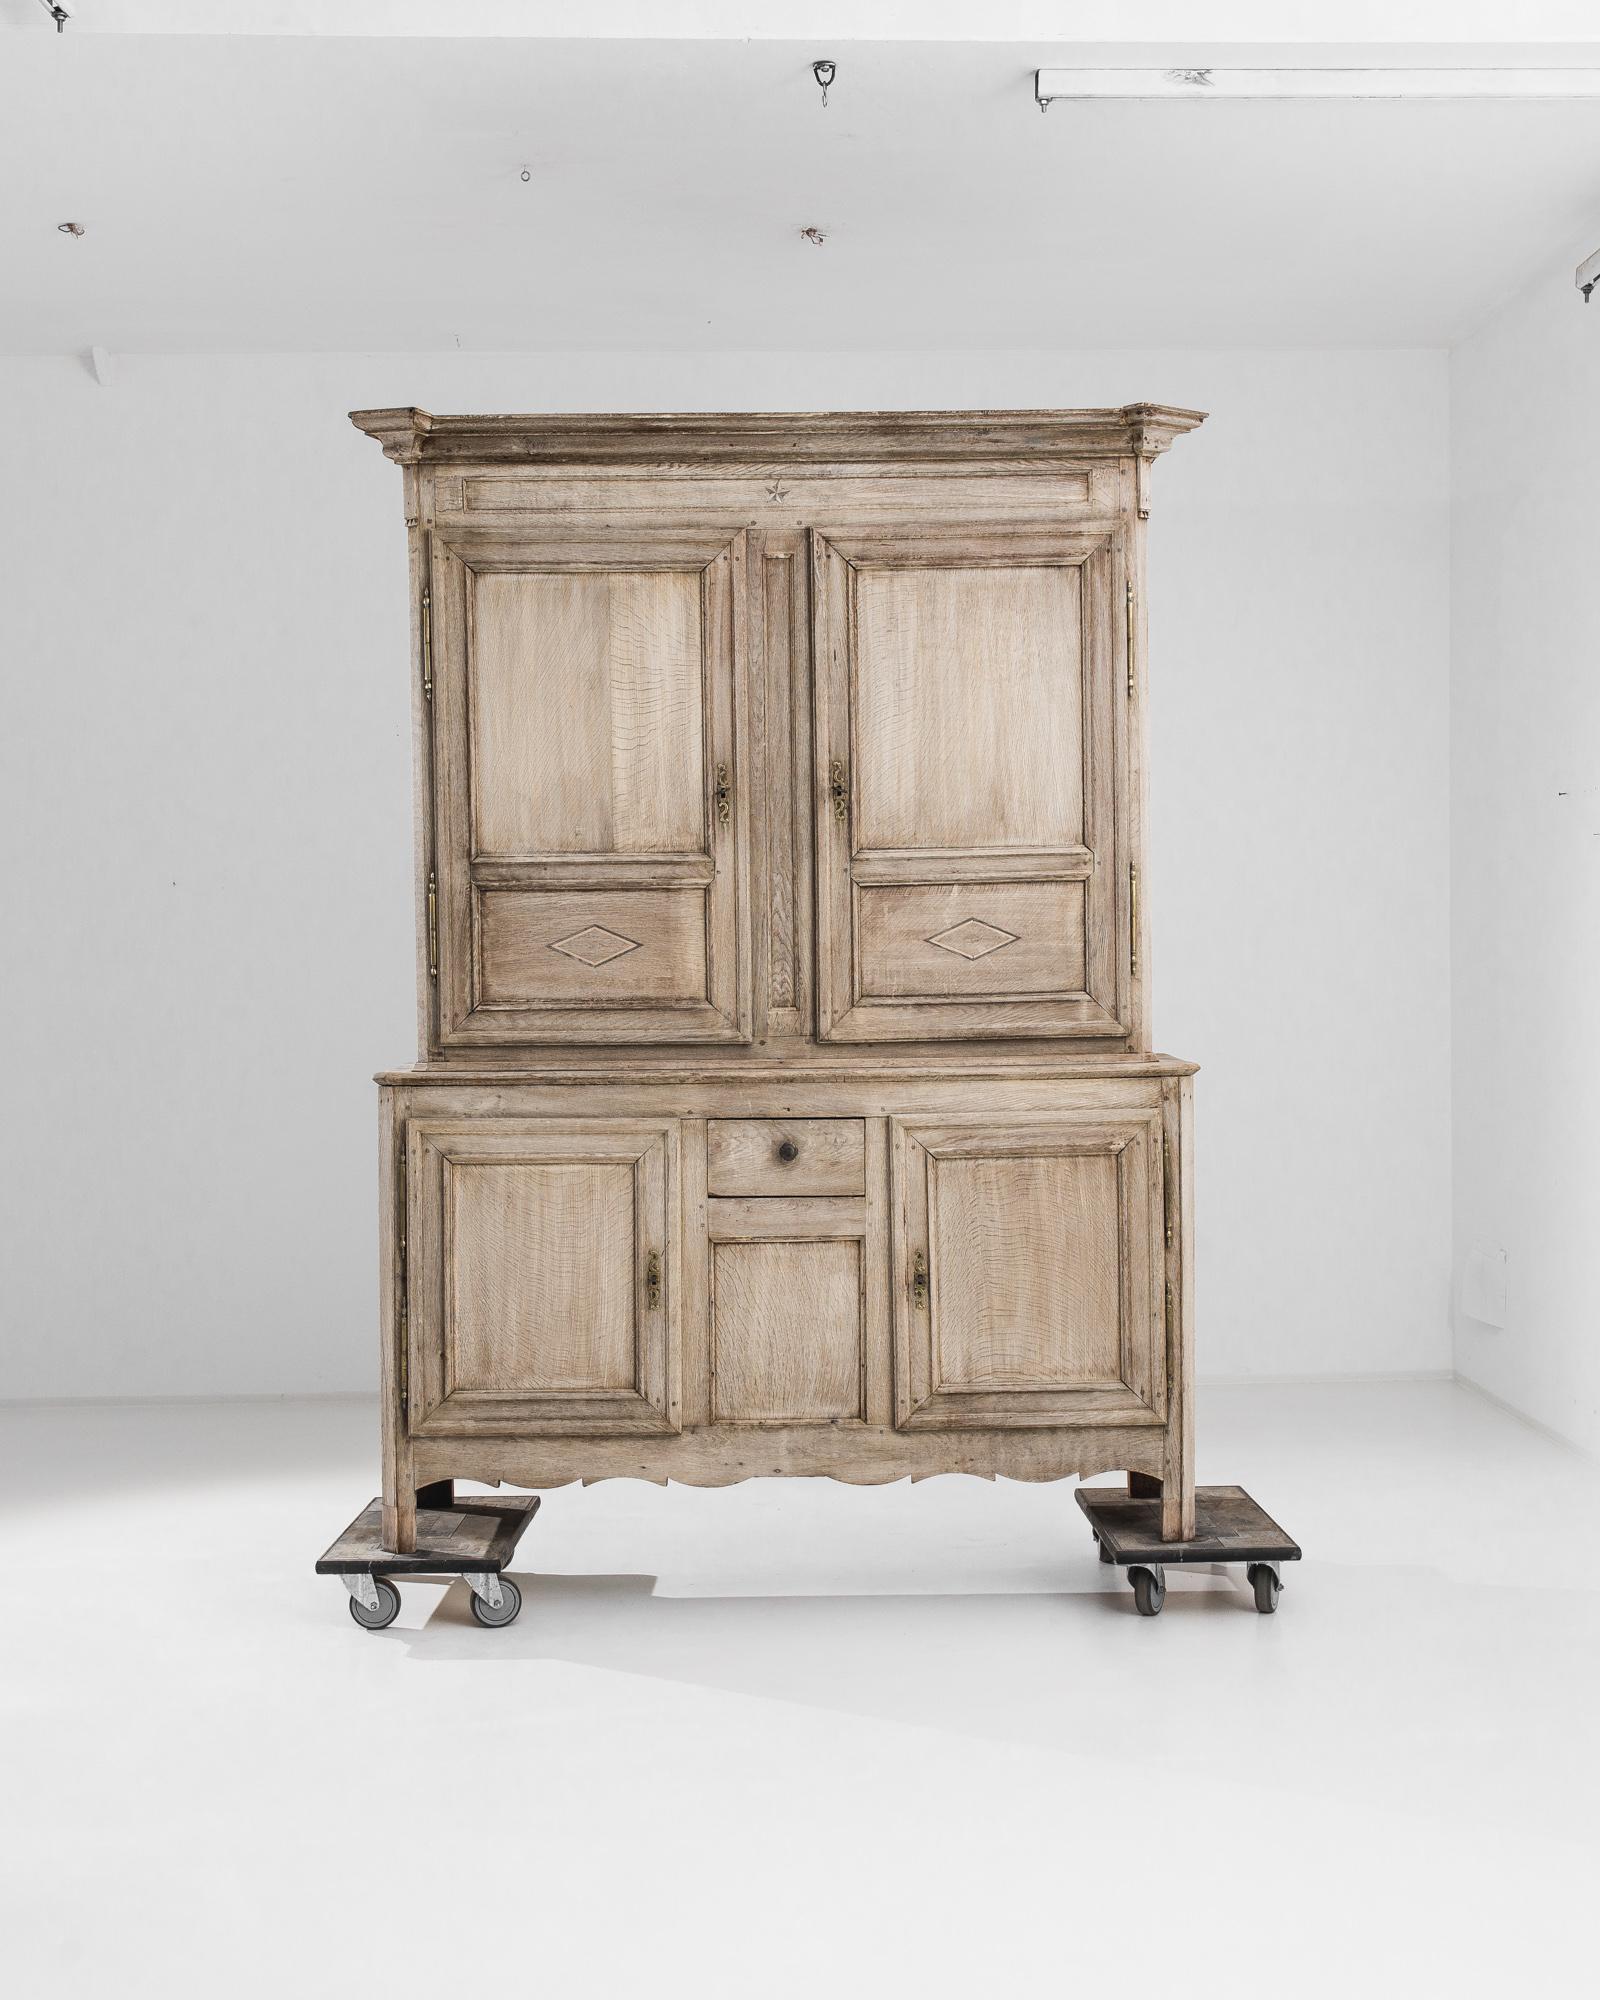 Step into the refined elegance of the 19th century with this 1860s French Bleached Oak Cabinet. This stunning piece features the classic lines and stately form of French provincial design, with a bleached oak finish that brings a light, airy feel to